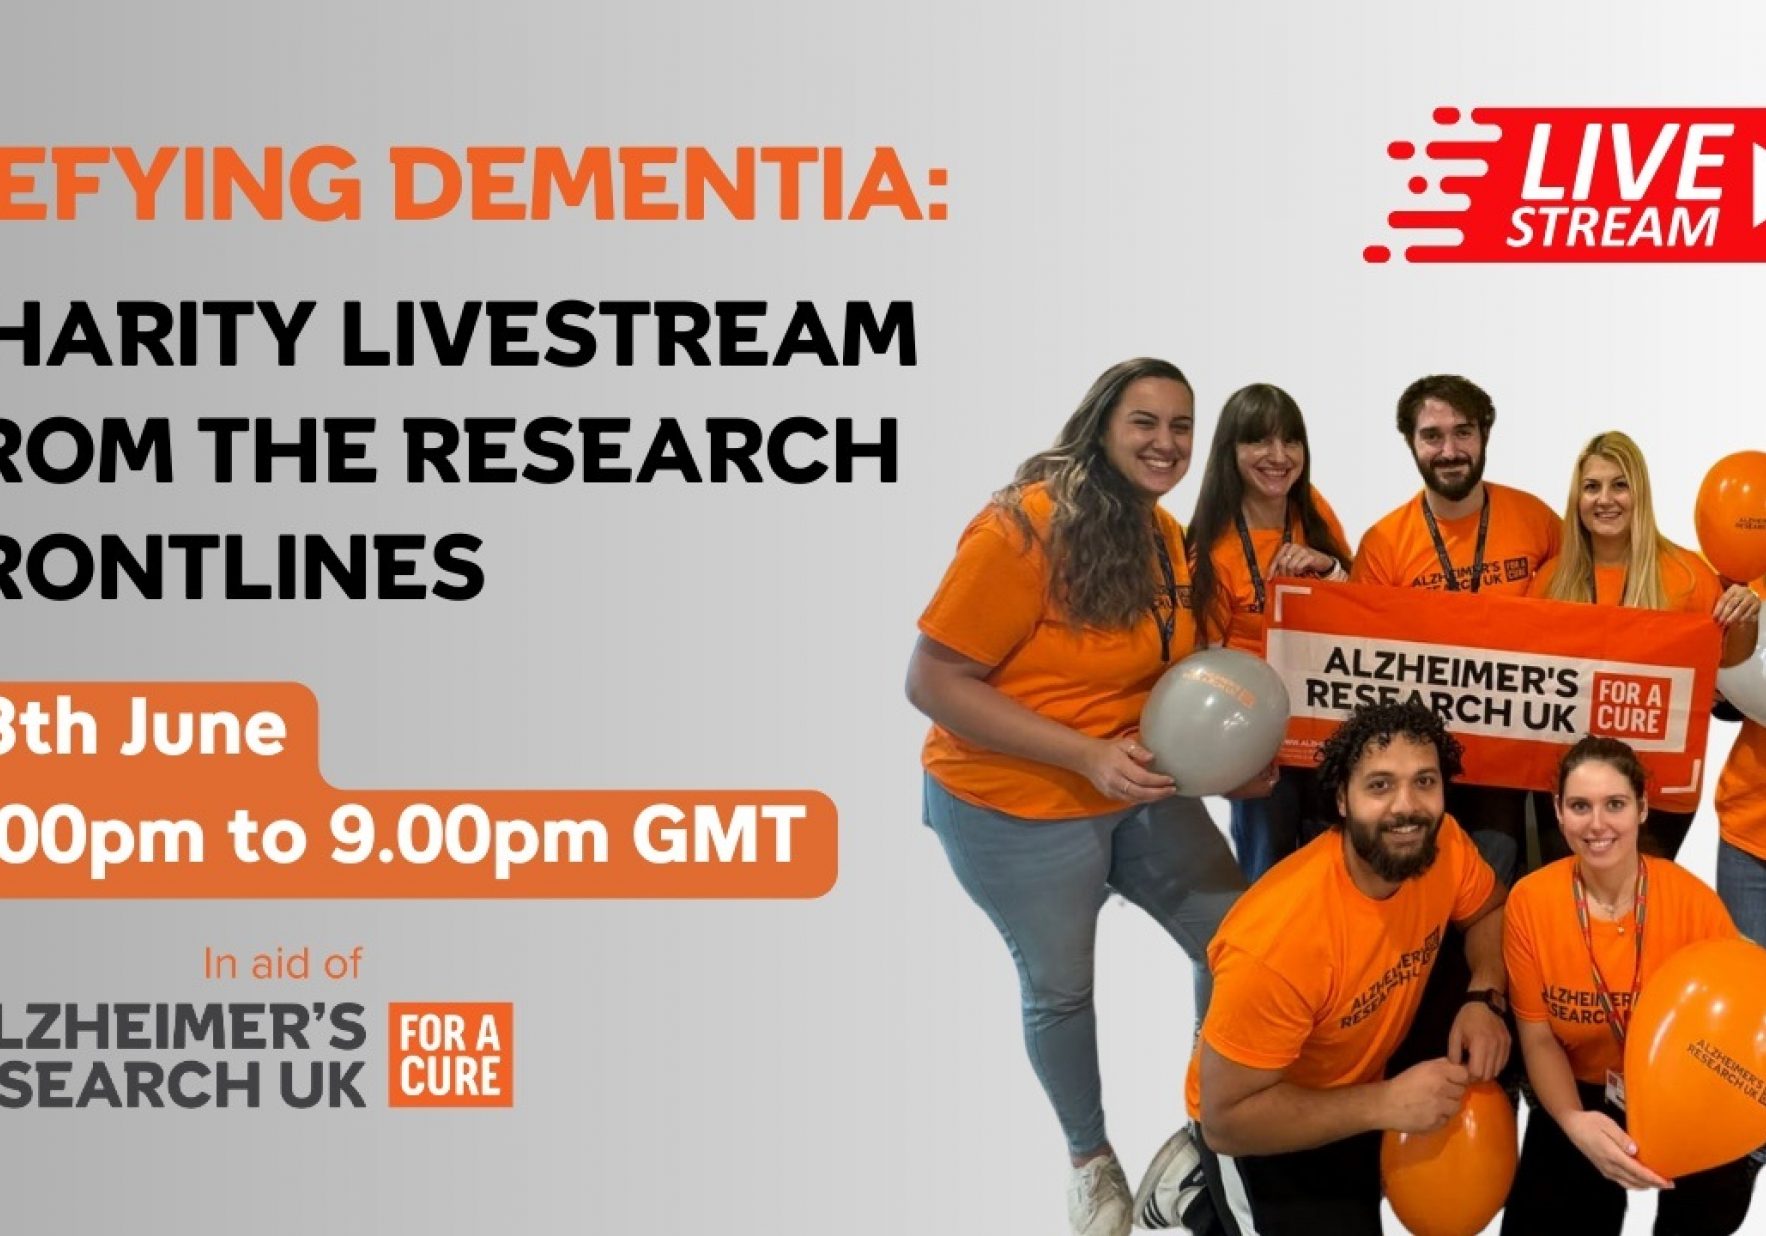 Defying Dementia Charity Livestream From The Research Frontlines